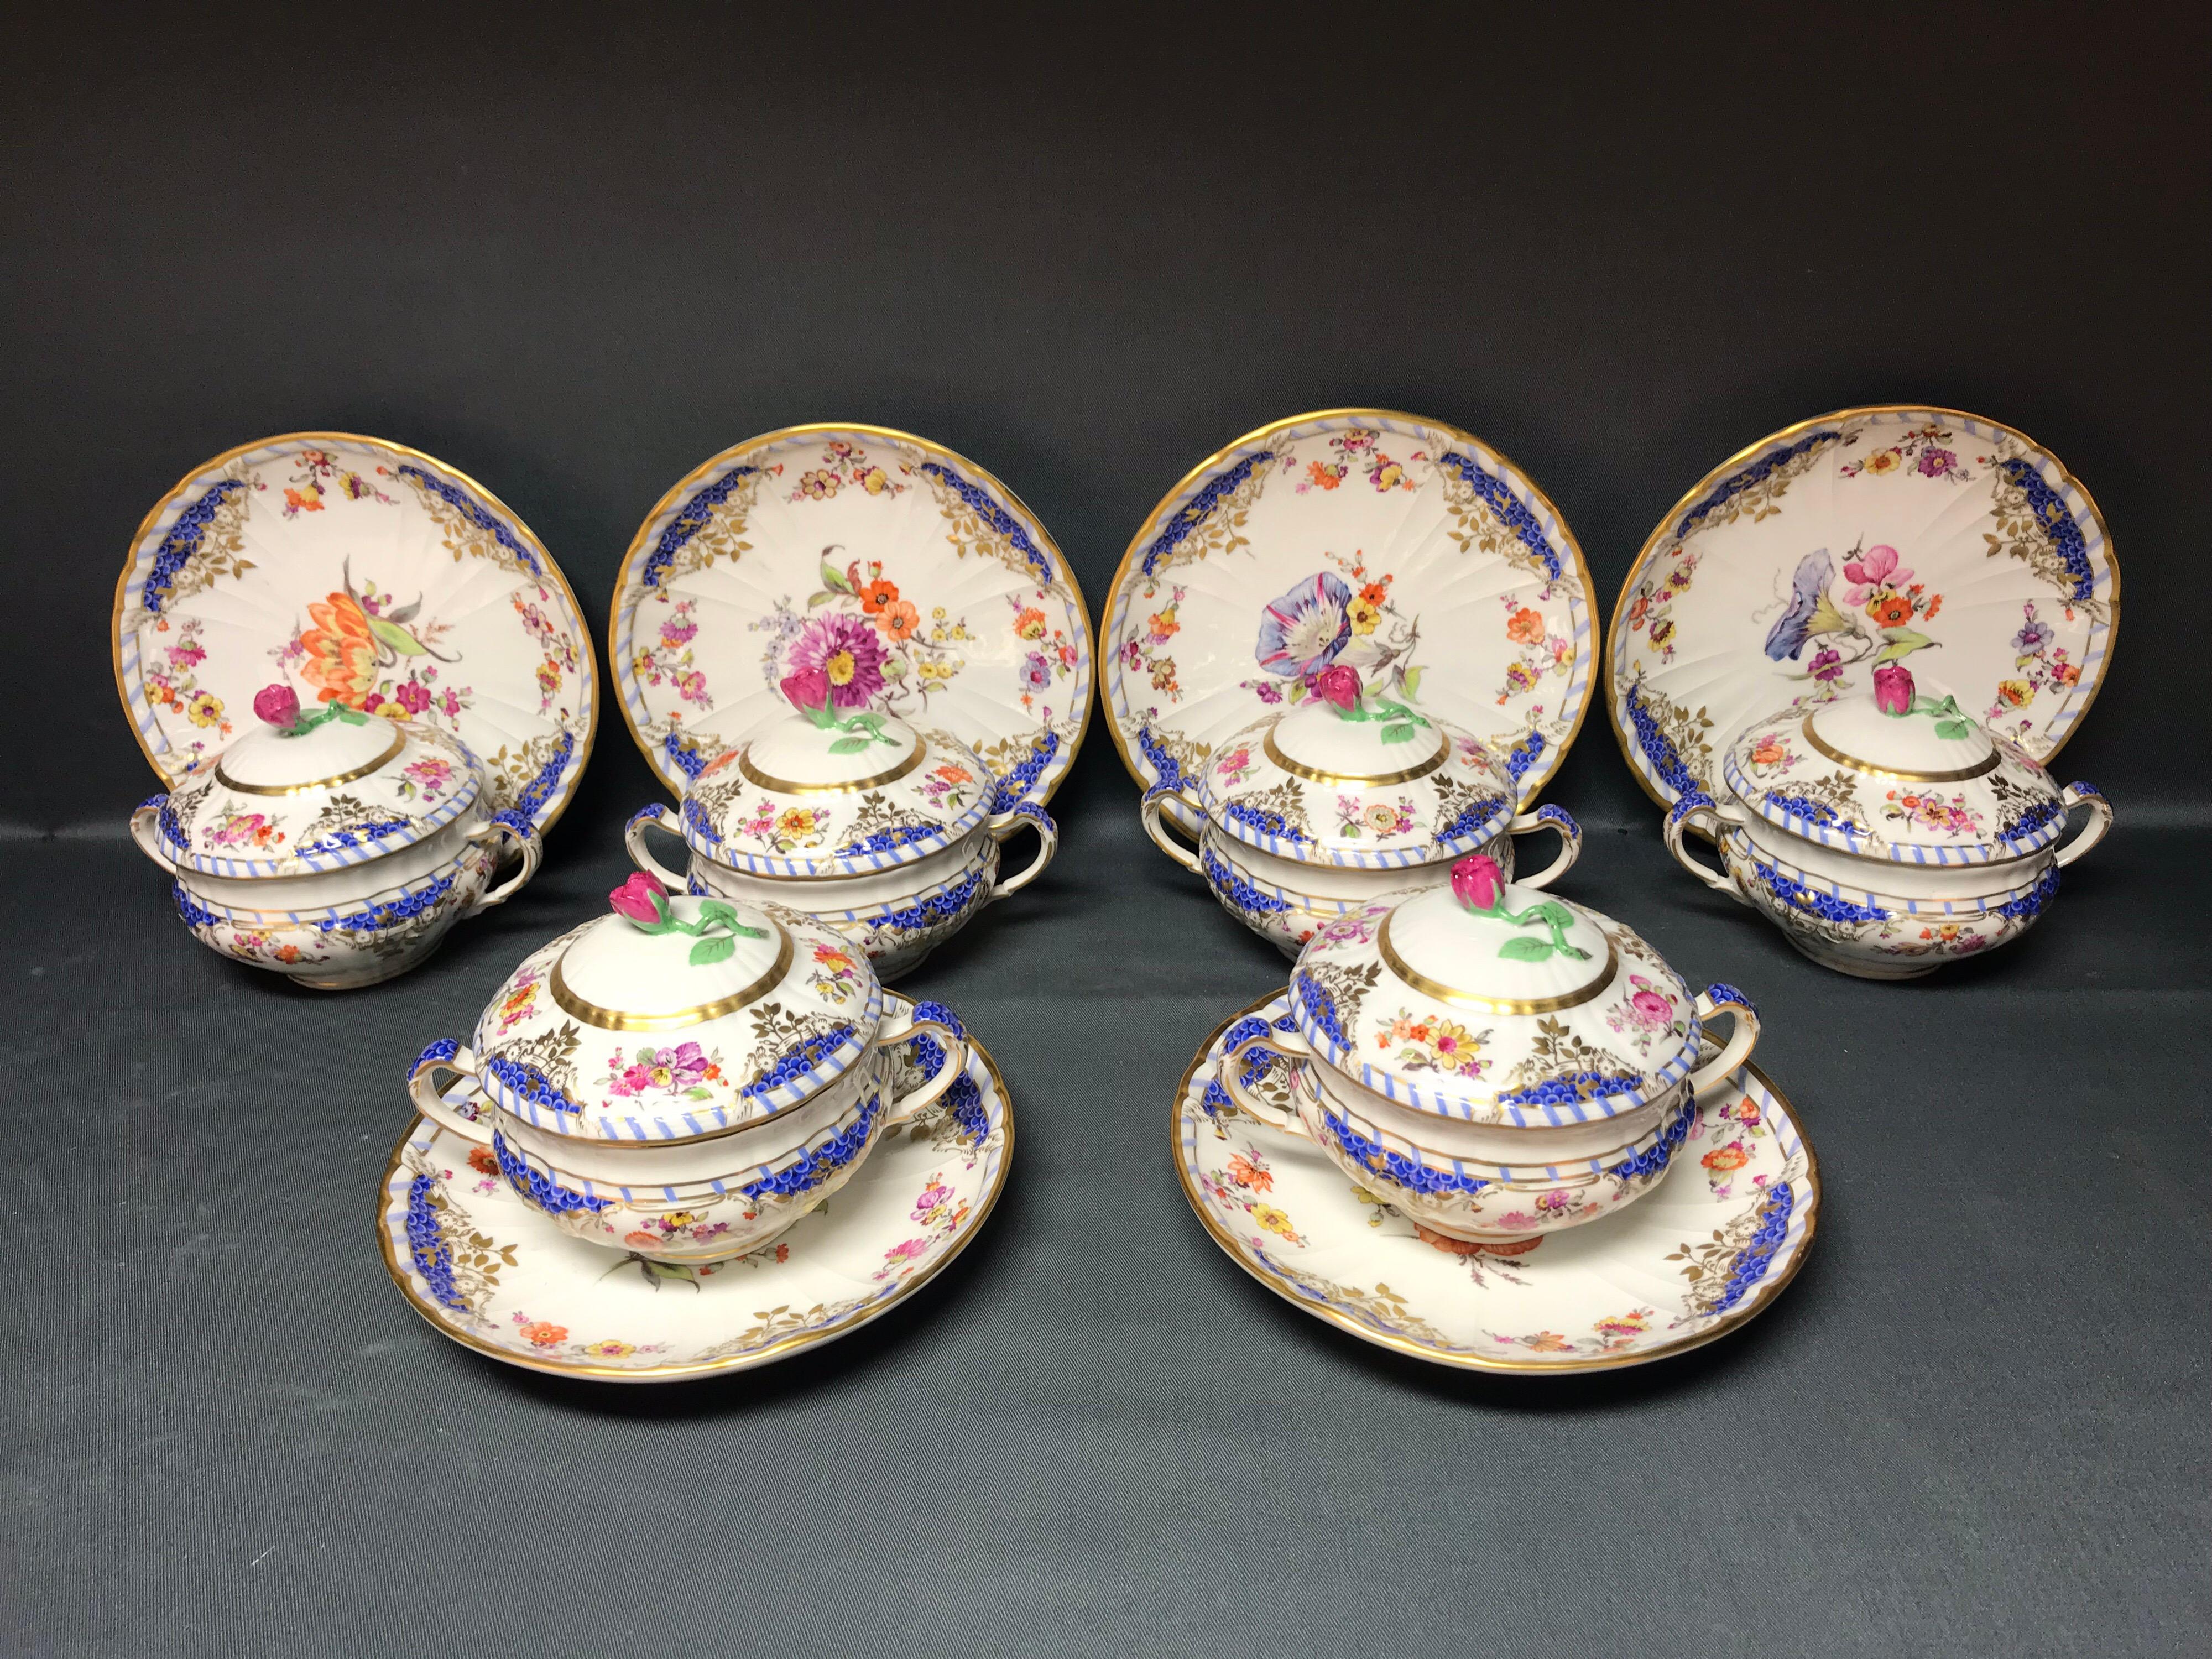 Unique set of 6 KPM Berlin soup cups with saucer in the decor Breslauer Stadtschloss

Magnificent flowers and gold painting.
Original price at the KPM is about 18.192 €

No damage
6 KPM Berlin soups cups.